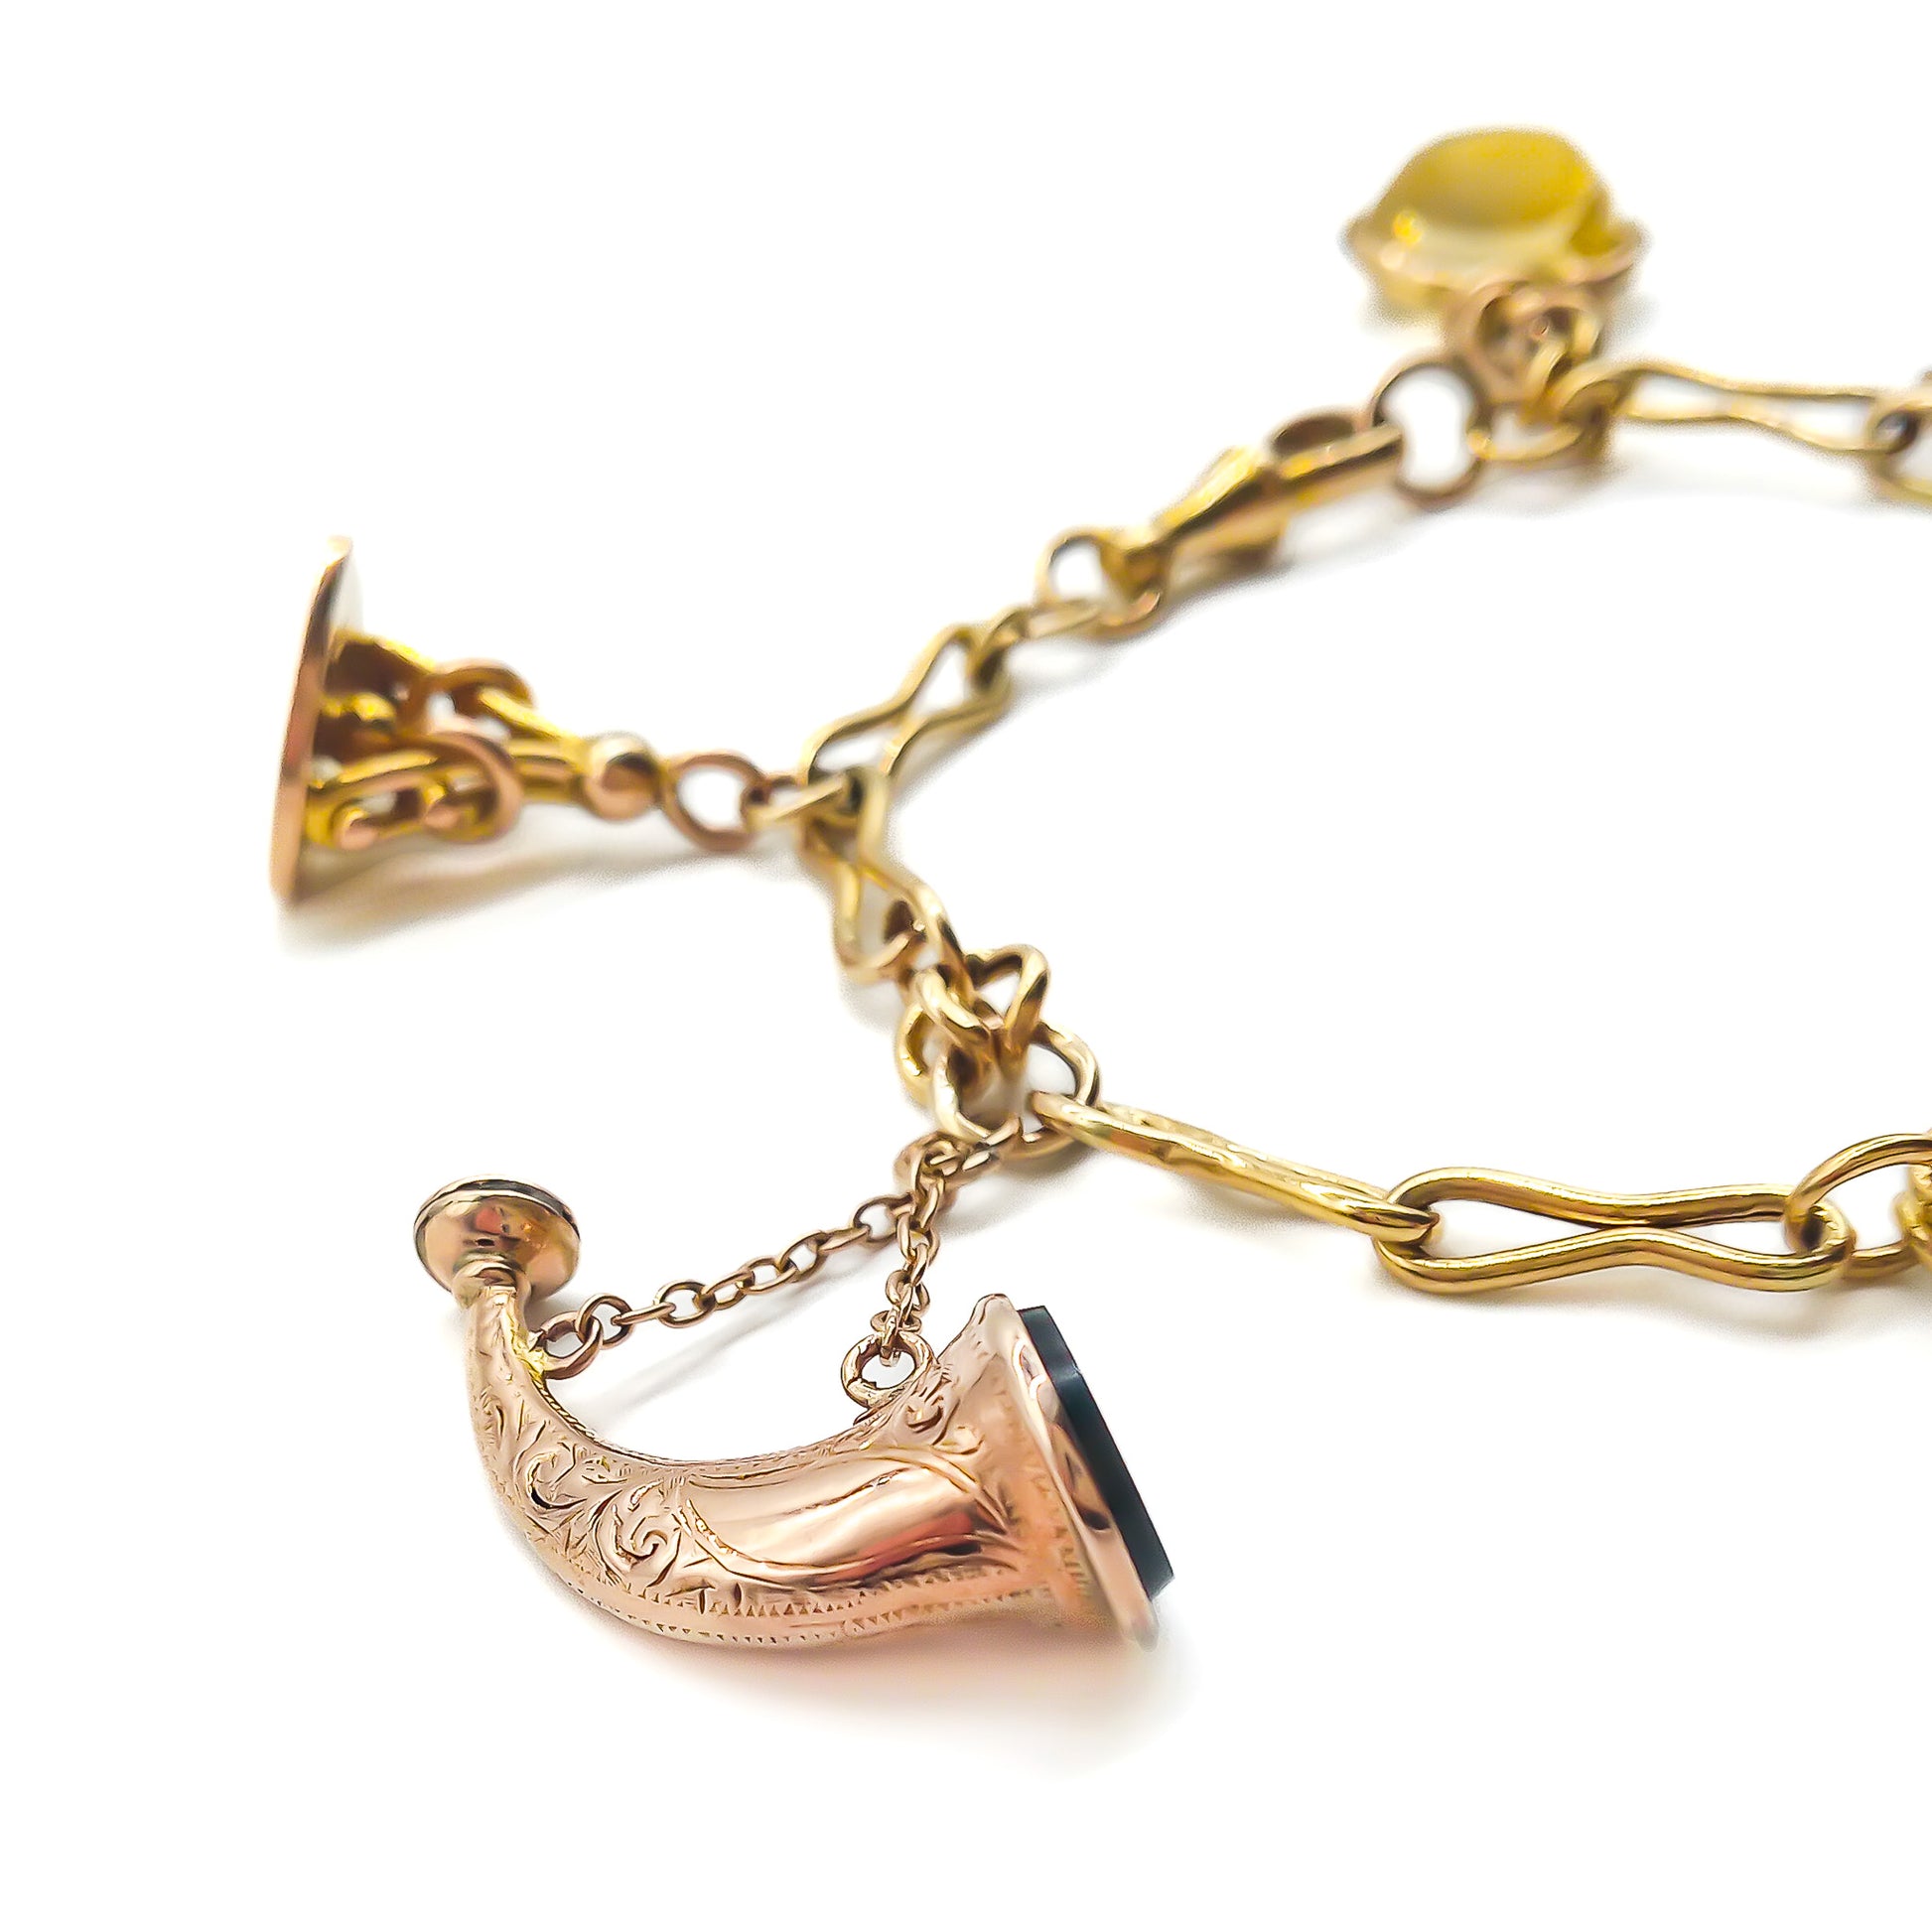 Very desirable Victorian 9ct yellow and rose gold bracelet with six unique seals and a dog clip.